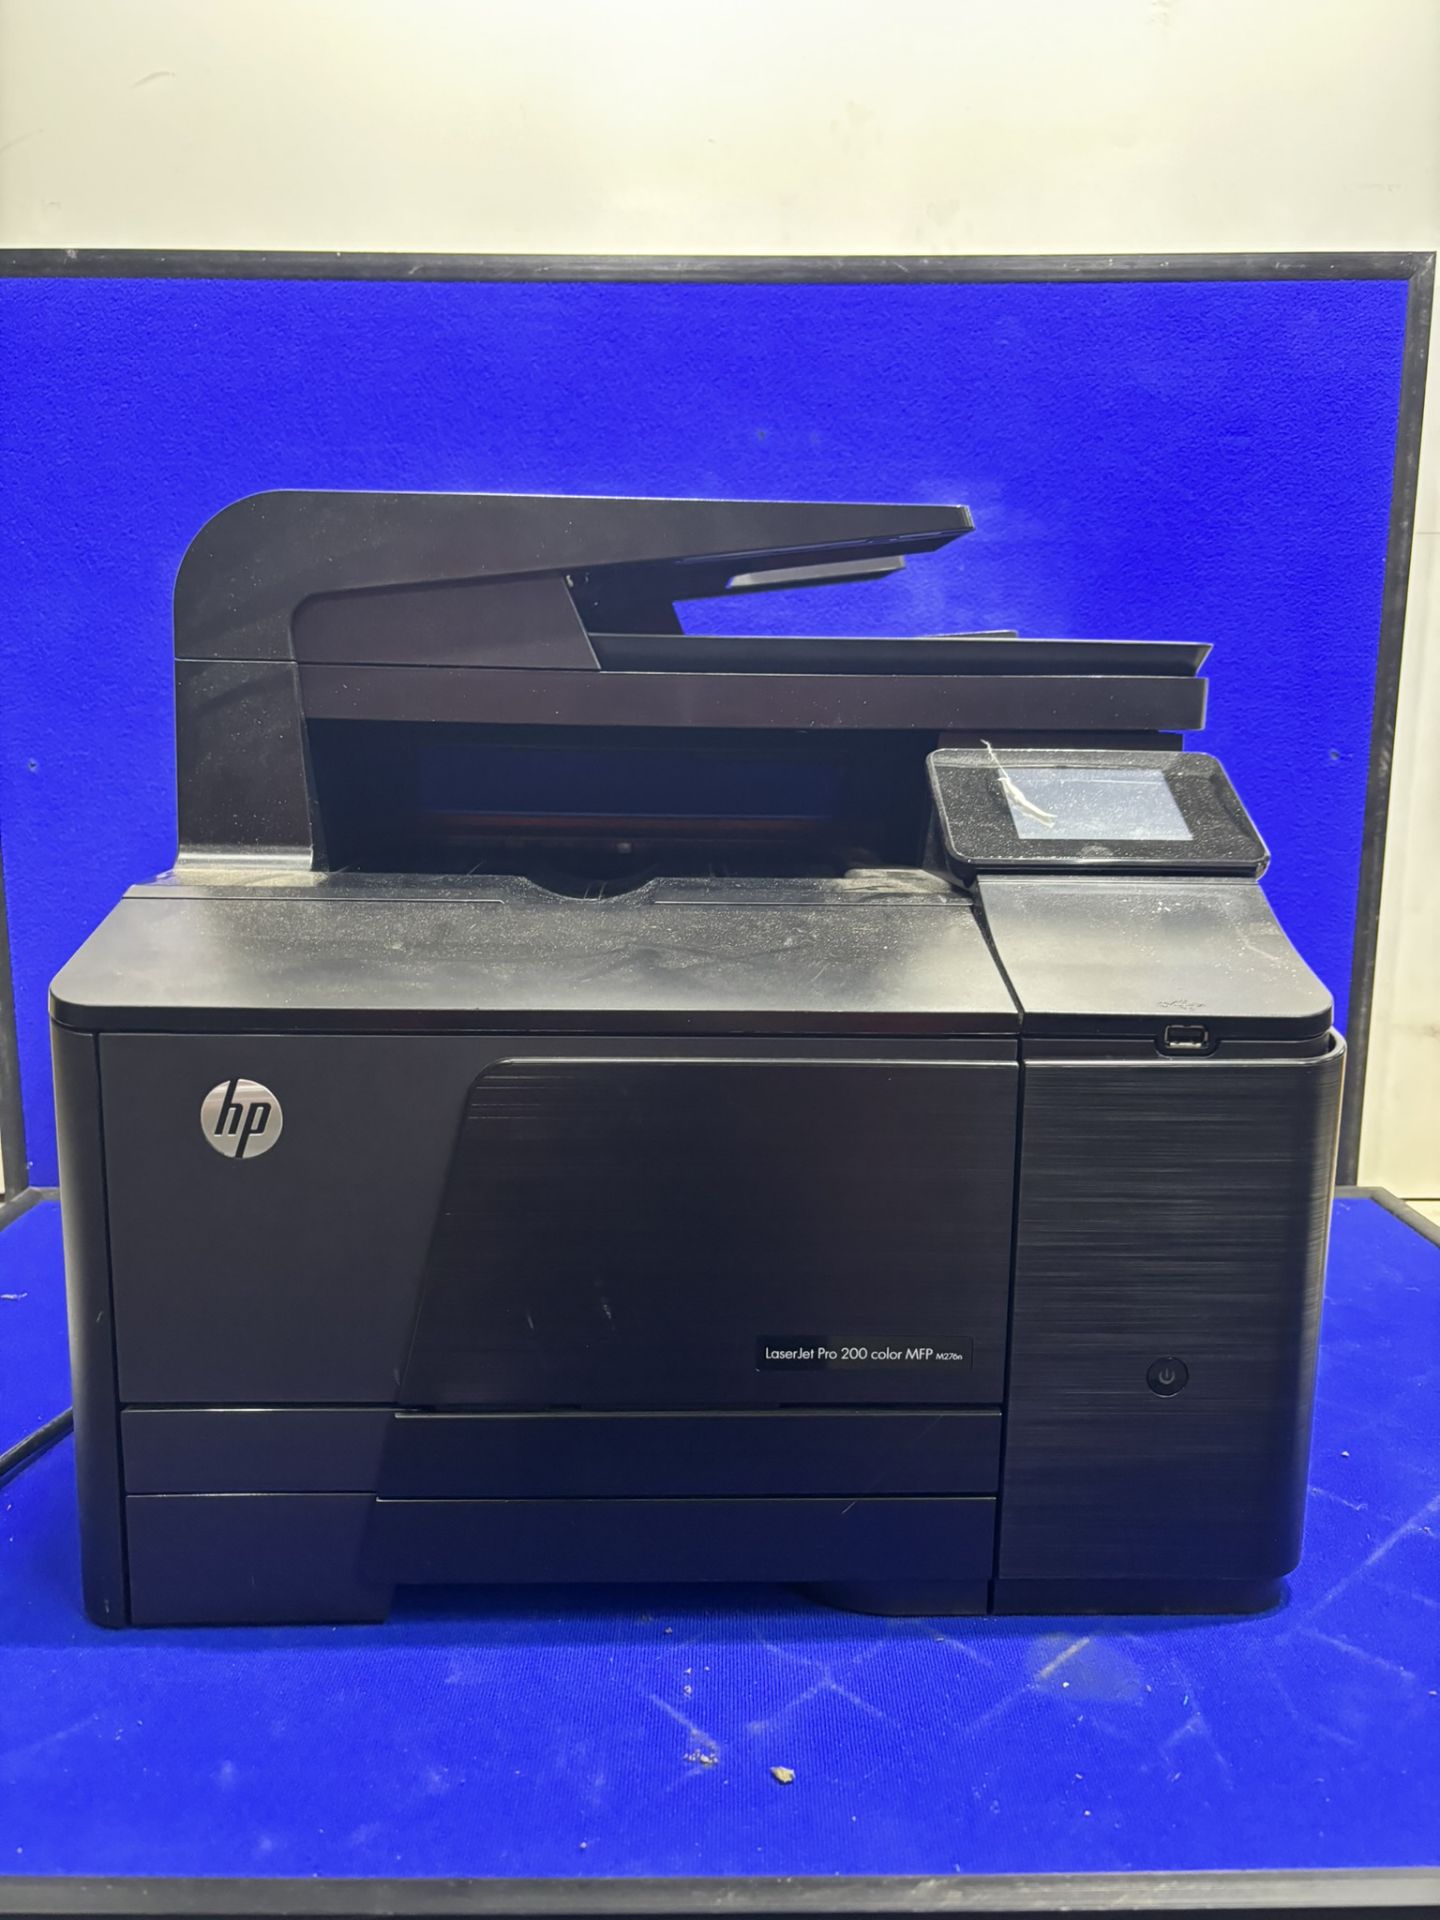 HP Laserjet Pro 200 M276nw All-in-One Color Printer - Image 3 of 12